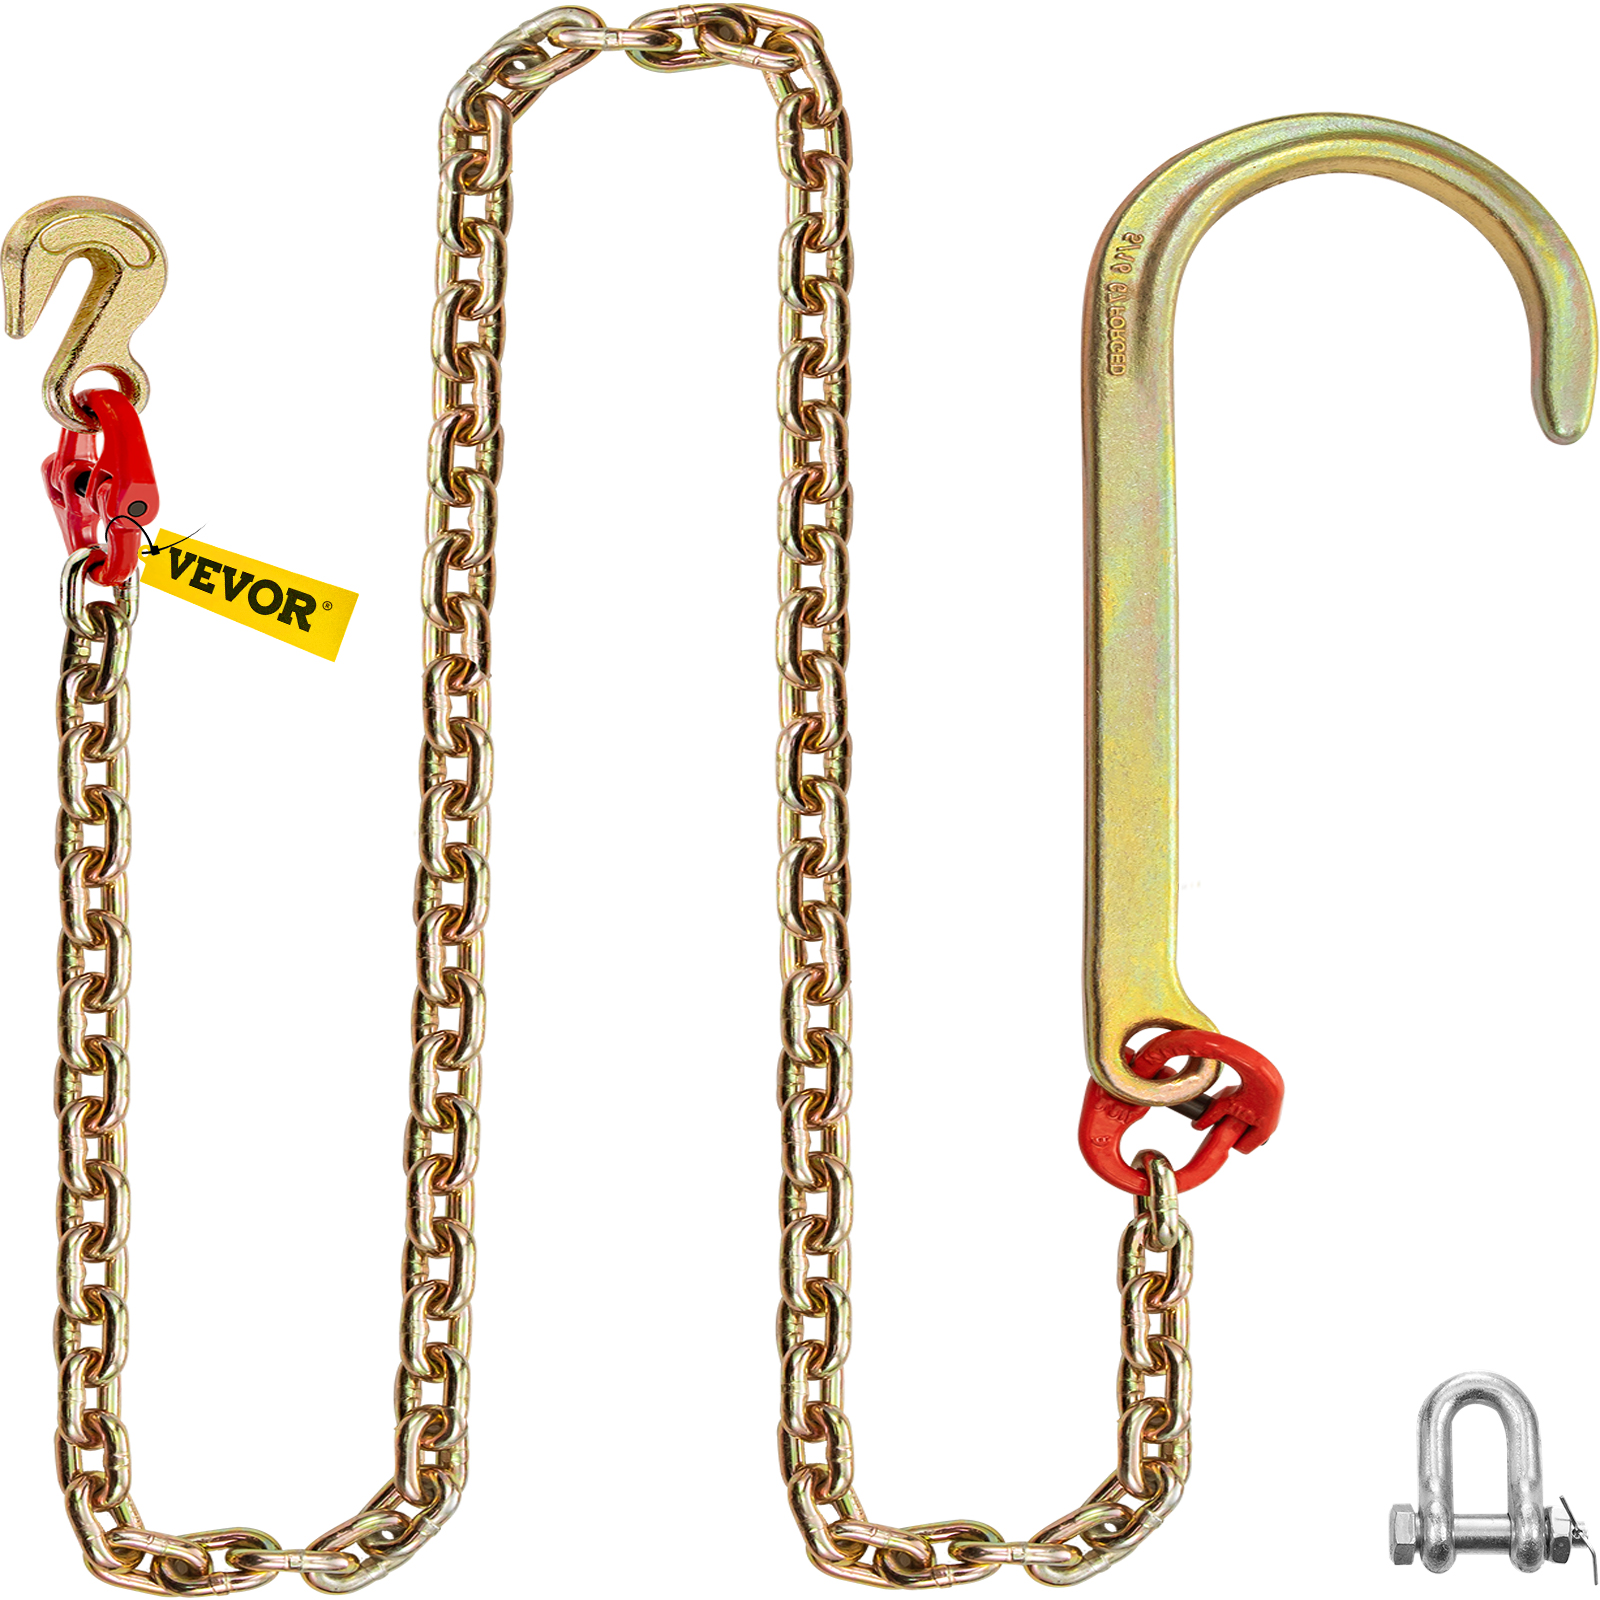 VEVOR J Hook Chain, 5/16 in x 6 ft Tow Chain Bridle, Grade 80 J